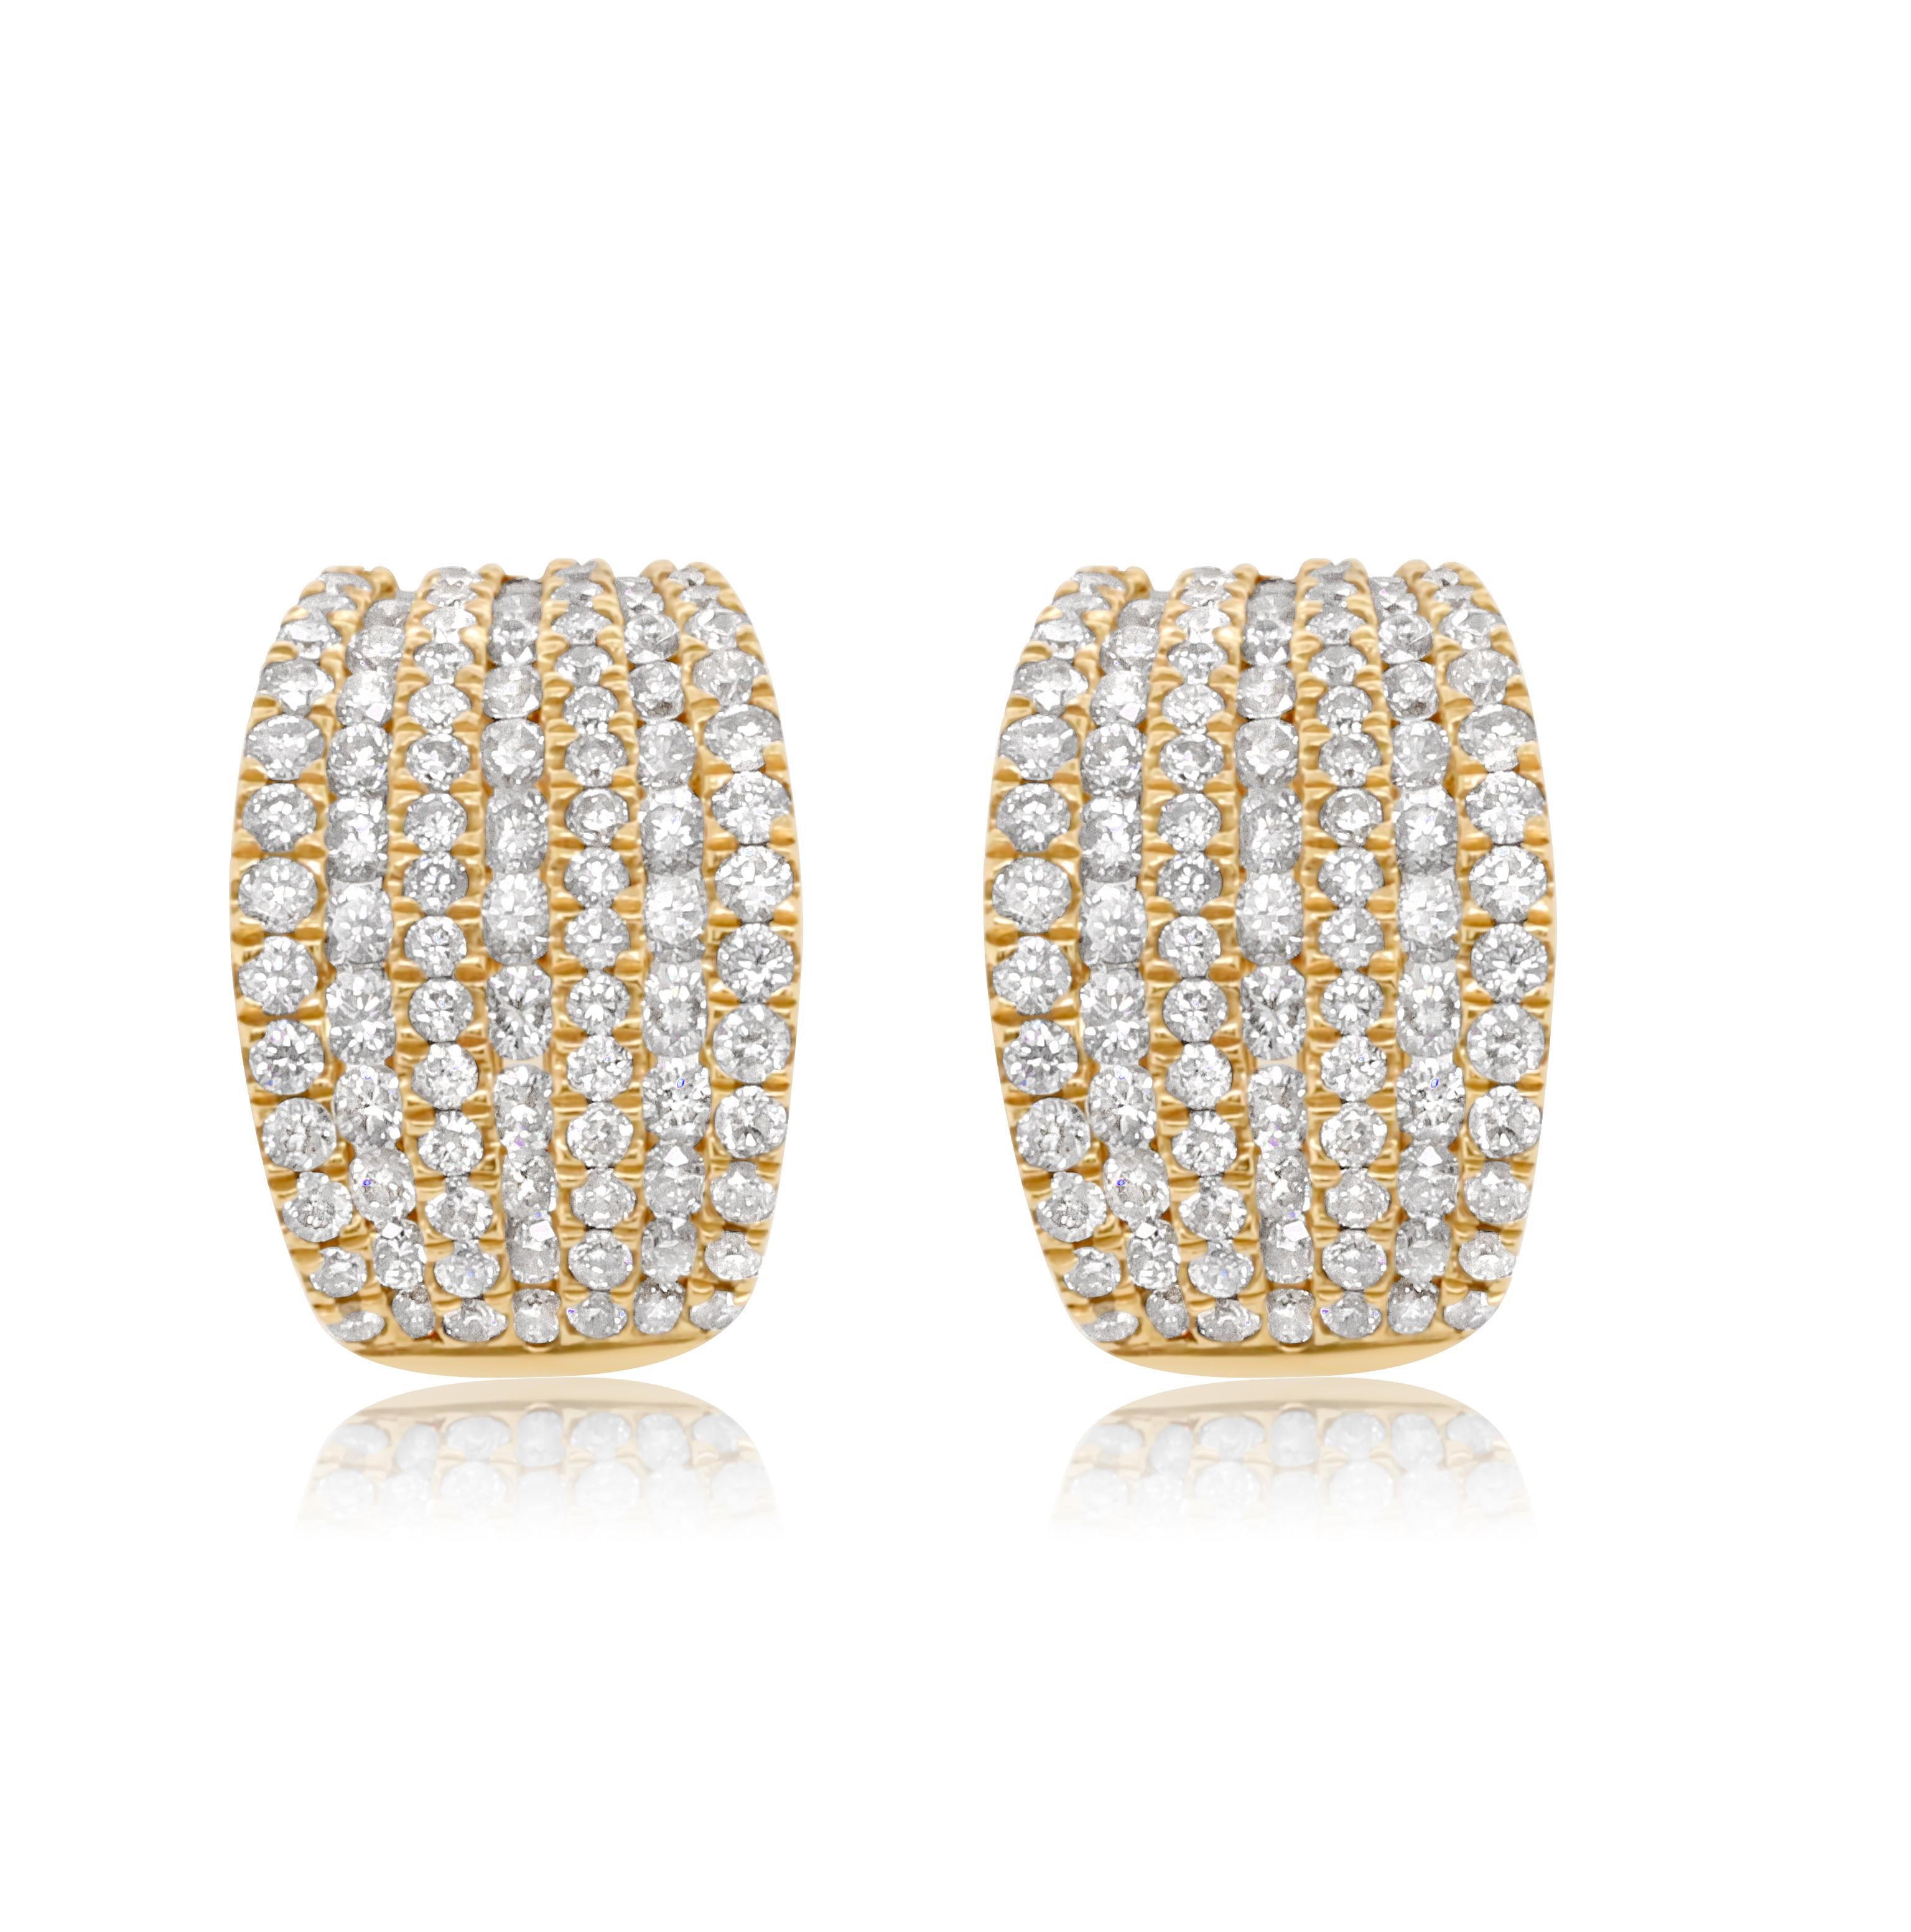 14K Yellow Gold Diamond Earrings featuring 1.58 Carats of Diamonds

Underline your look with this sharp 14K Yellow gold shape Diamond Earrings. High quality Diamonds. This Earrings will underline your exquisite look for any occasion.

. is a leading